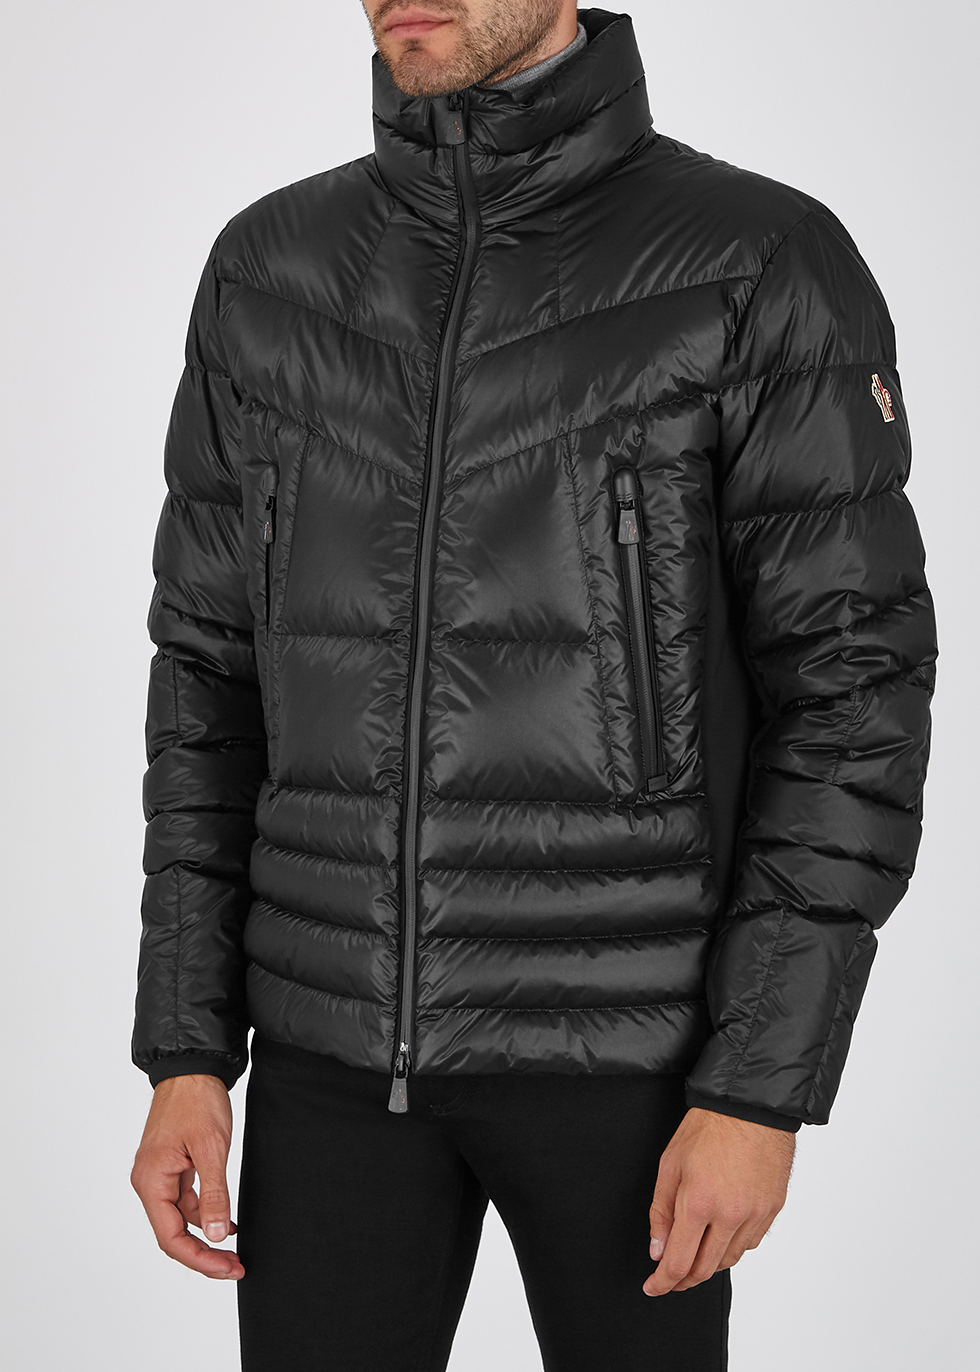 Moncler Grenoble Canmore black shell 